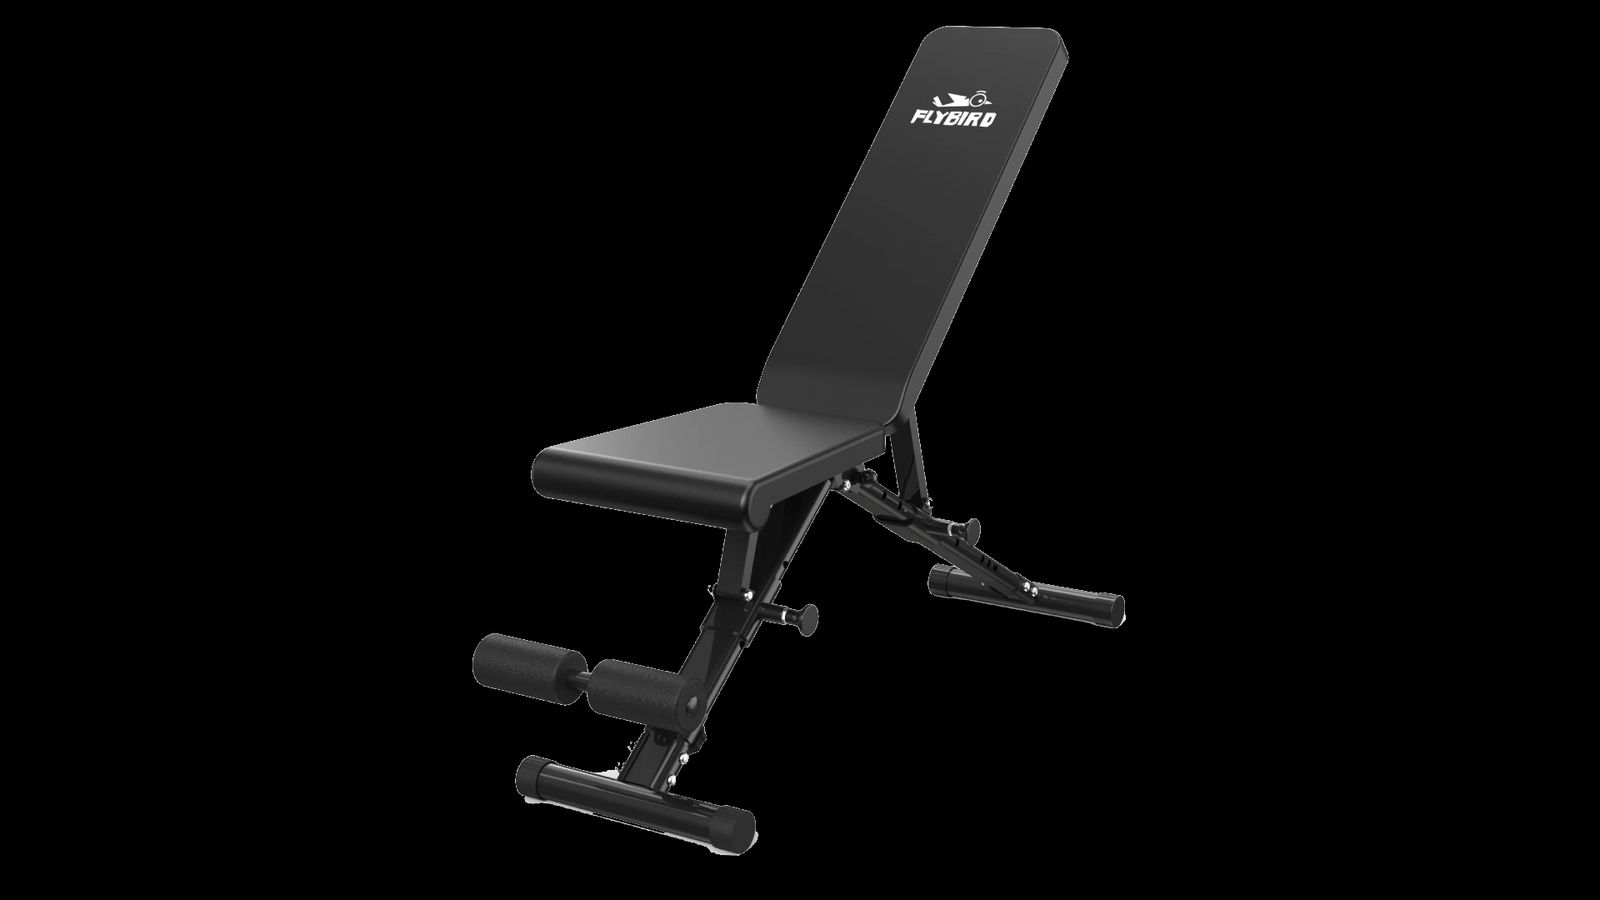 Flybird Adjustable Weight Bench product image of a black adjustable weight bench.